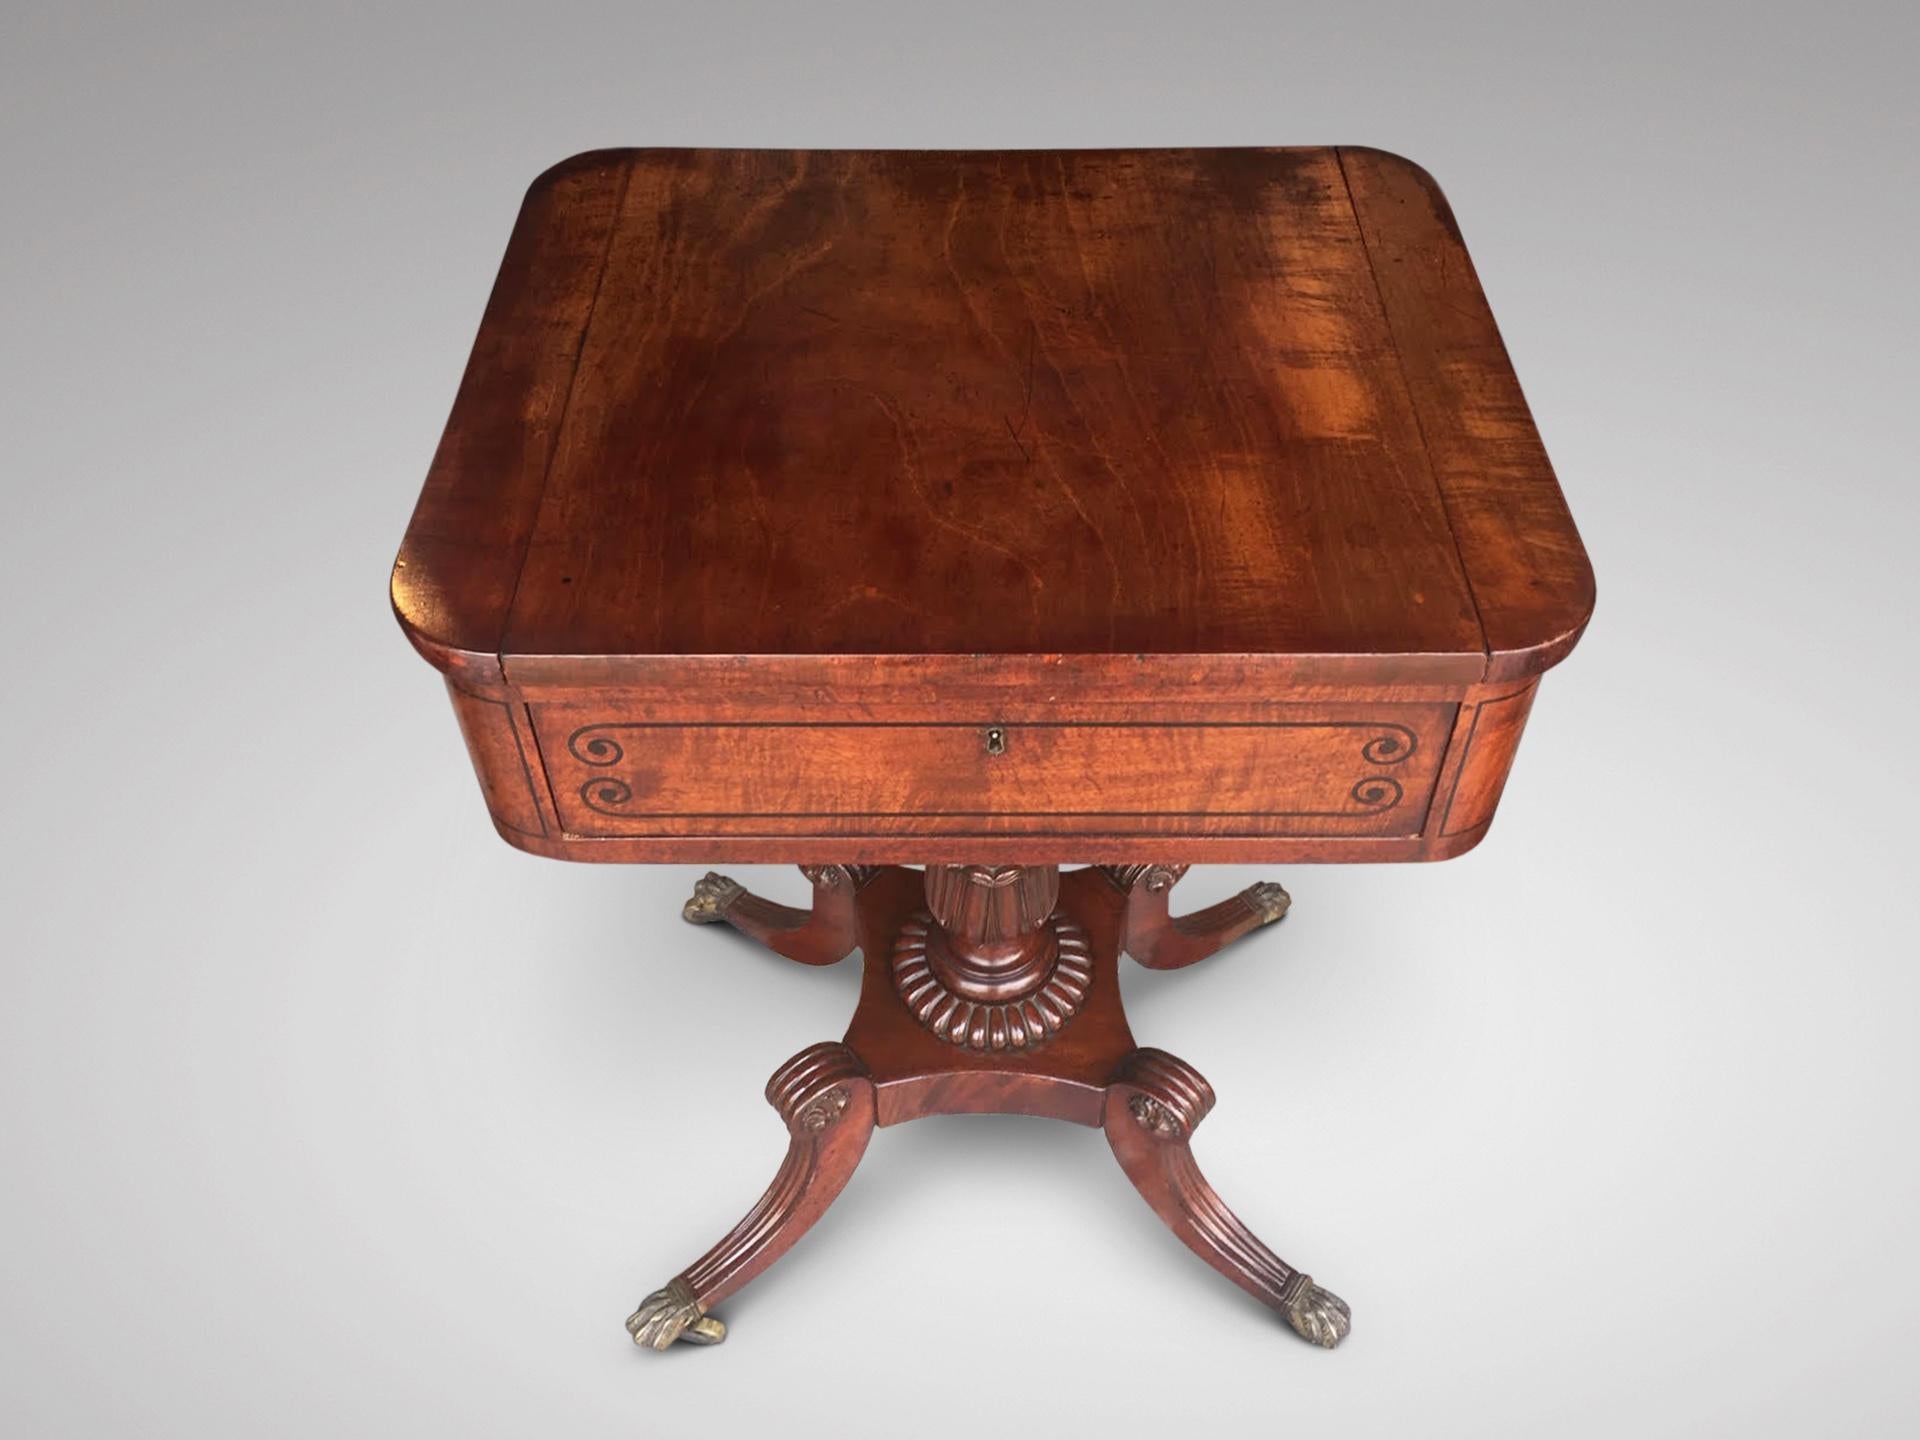 George III Lovely 19th Century Georgian Period Mahogany Games and Chess Table